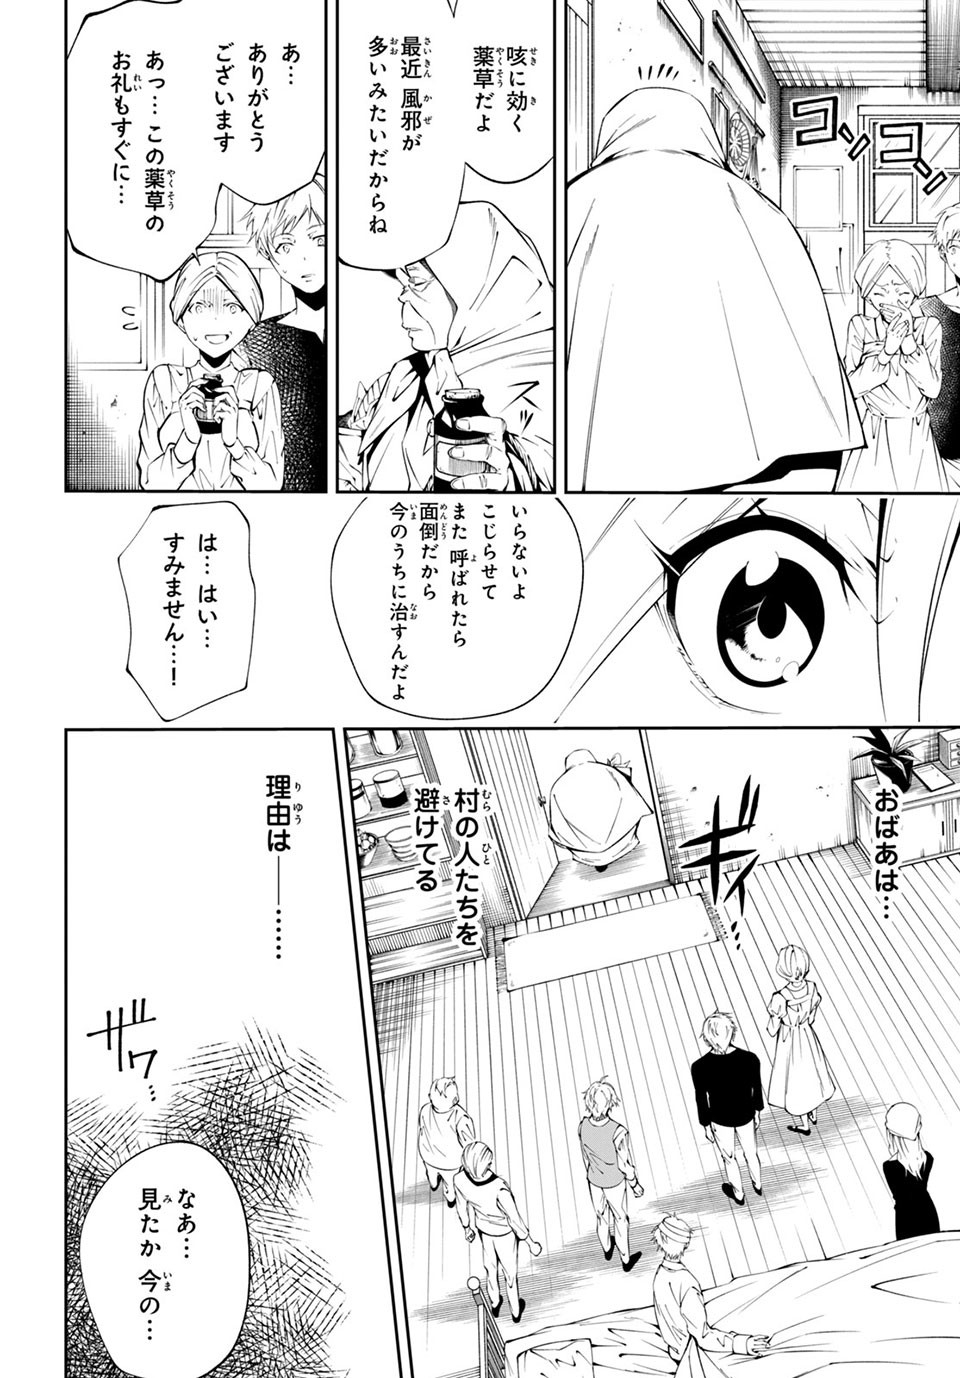 Shaman King: and a garden 第6.2話 - Page 8